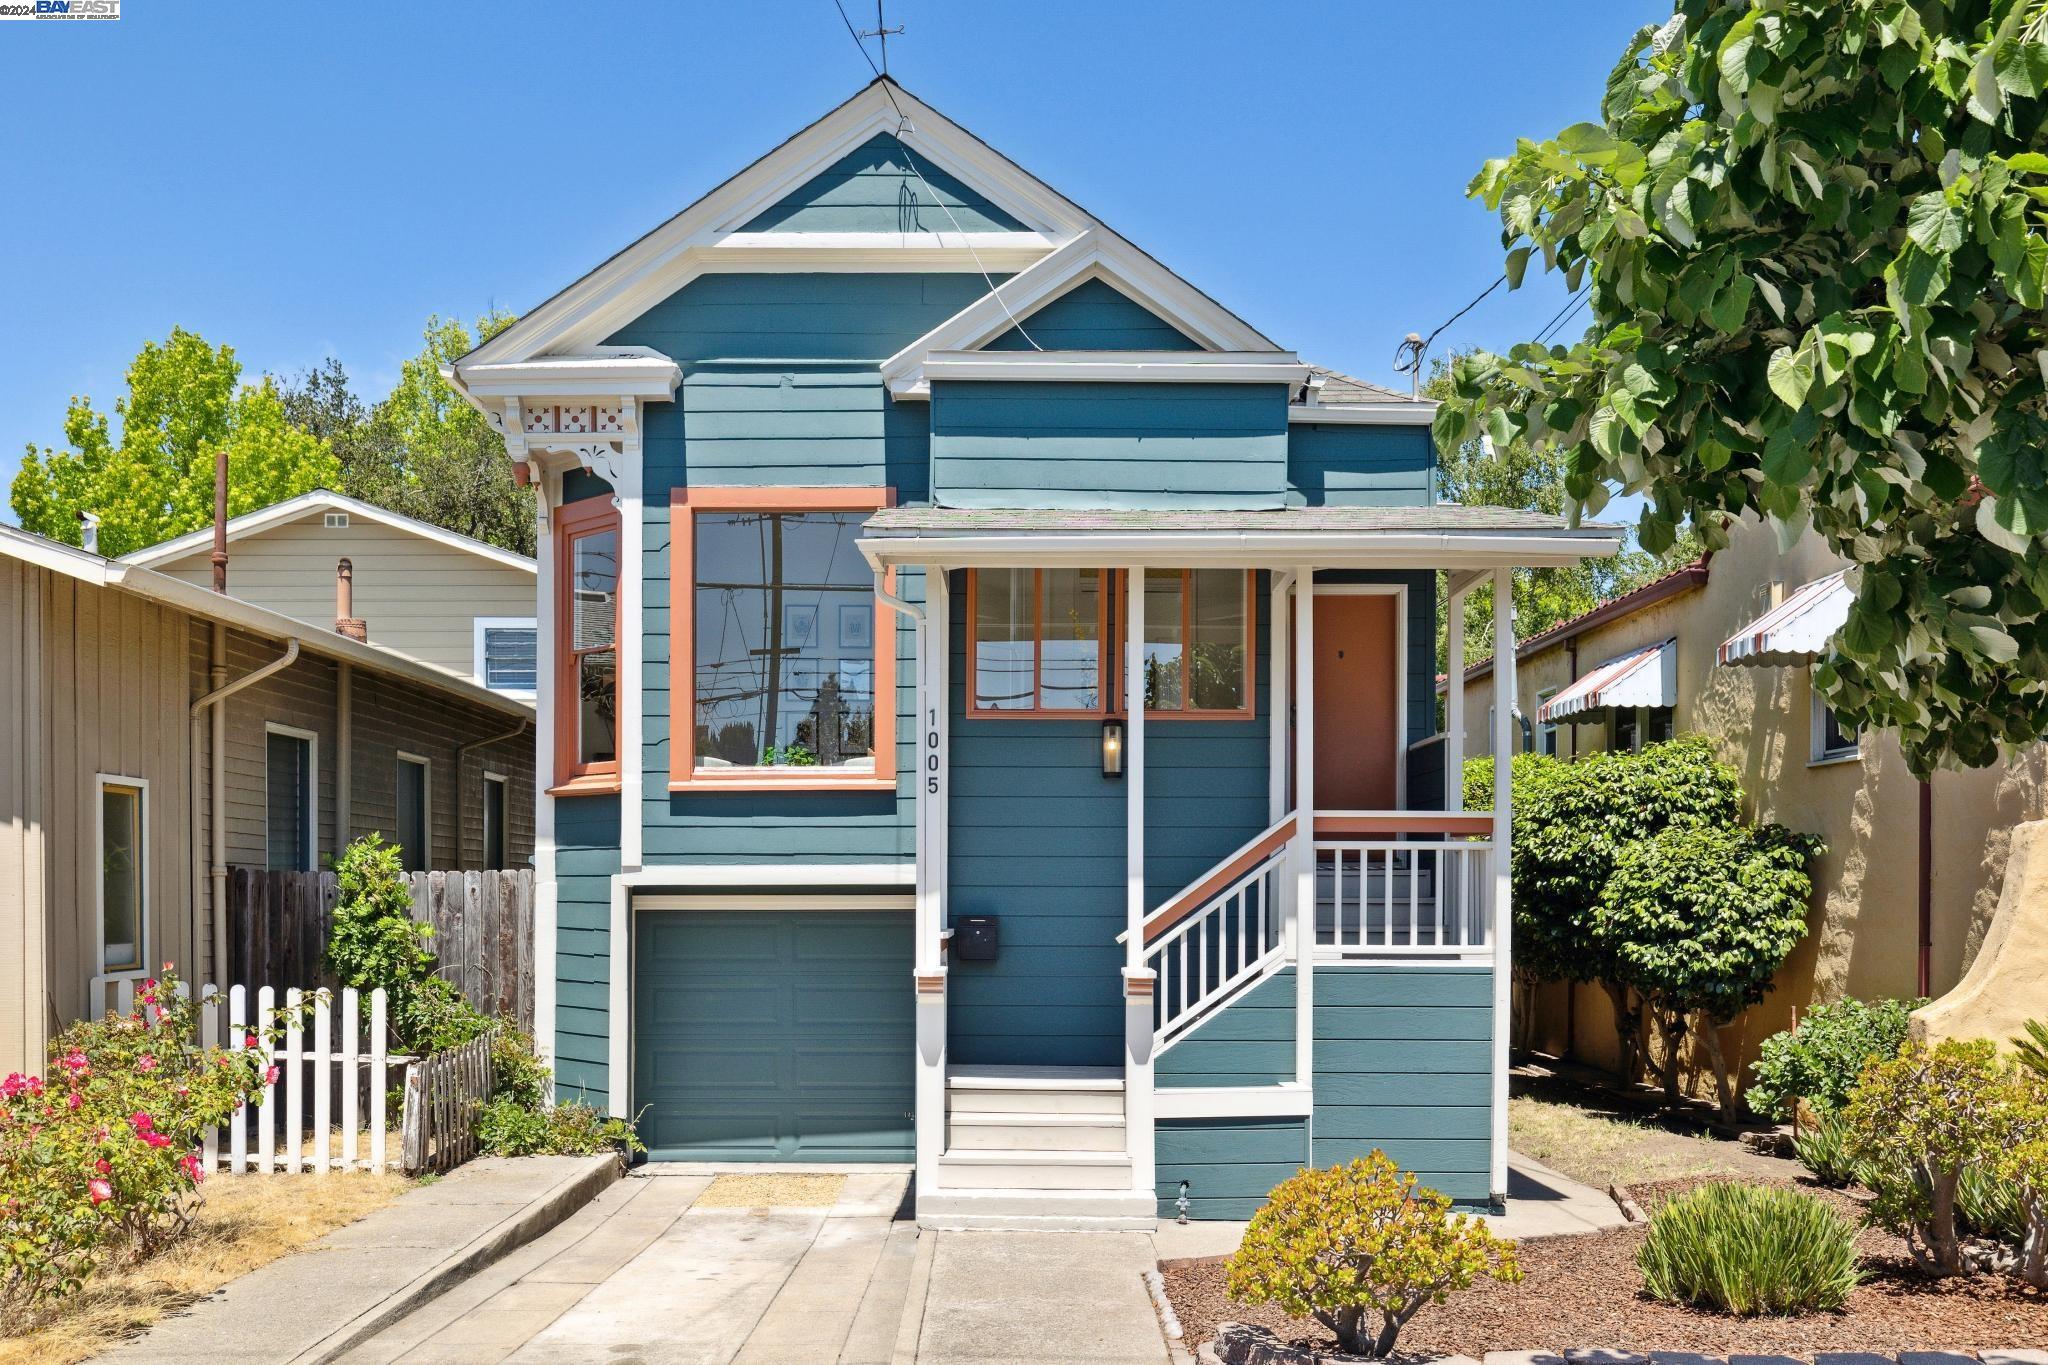 Abundantly Charming and Wonderfully Versatile Alameda Victorian. Built in 1900, 1005 Lincoln Avenue is an updated 2+ bedroom, 1.5 bath 1,313sqft home situated on a 3,300sqft lot. With high ceilings and vintage details throughout, this beautiful home is the perfect mix of warmth and sophistication. The large living room and sitting area is light filled – ideal for gatherings or relaxation. The formal dining room with its built-ins can accommodate meals both intimate and lavish. The heart of the home is the updated kitchen with butcher block counters, newer appliances and ample storage. Beyond the kitchen is the fun sunroom which leads to a large deck. 2 stunning bedrooms and updated bathroom with shower/bath round out the main floor. Downstairs leads to 785sqft of space for office/family room/Potential Jr. ADU! Don’t miss the garage and storage area! The backyard with its prolific orange tree is spacious, private and sunny! Close to the restaurants/café/shops, Top Performing Schools, Parks, Transportation and Beach. Do not miss this Alameda Gem!